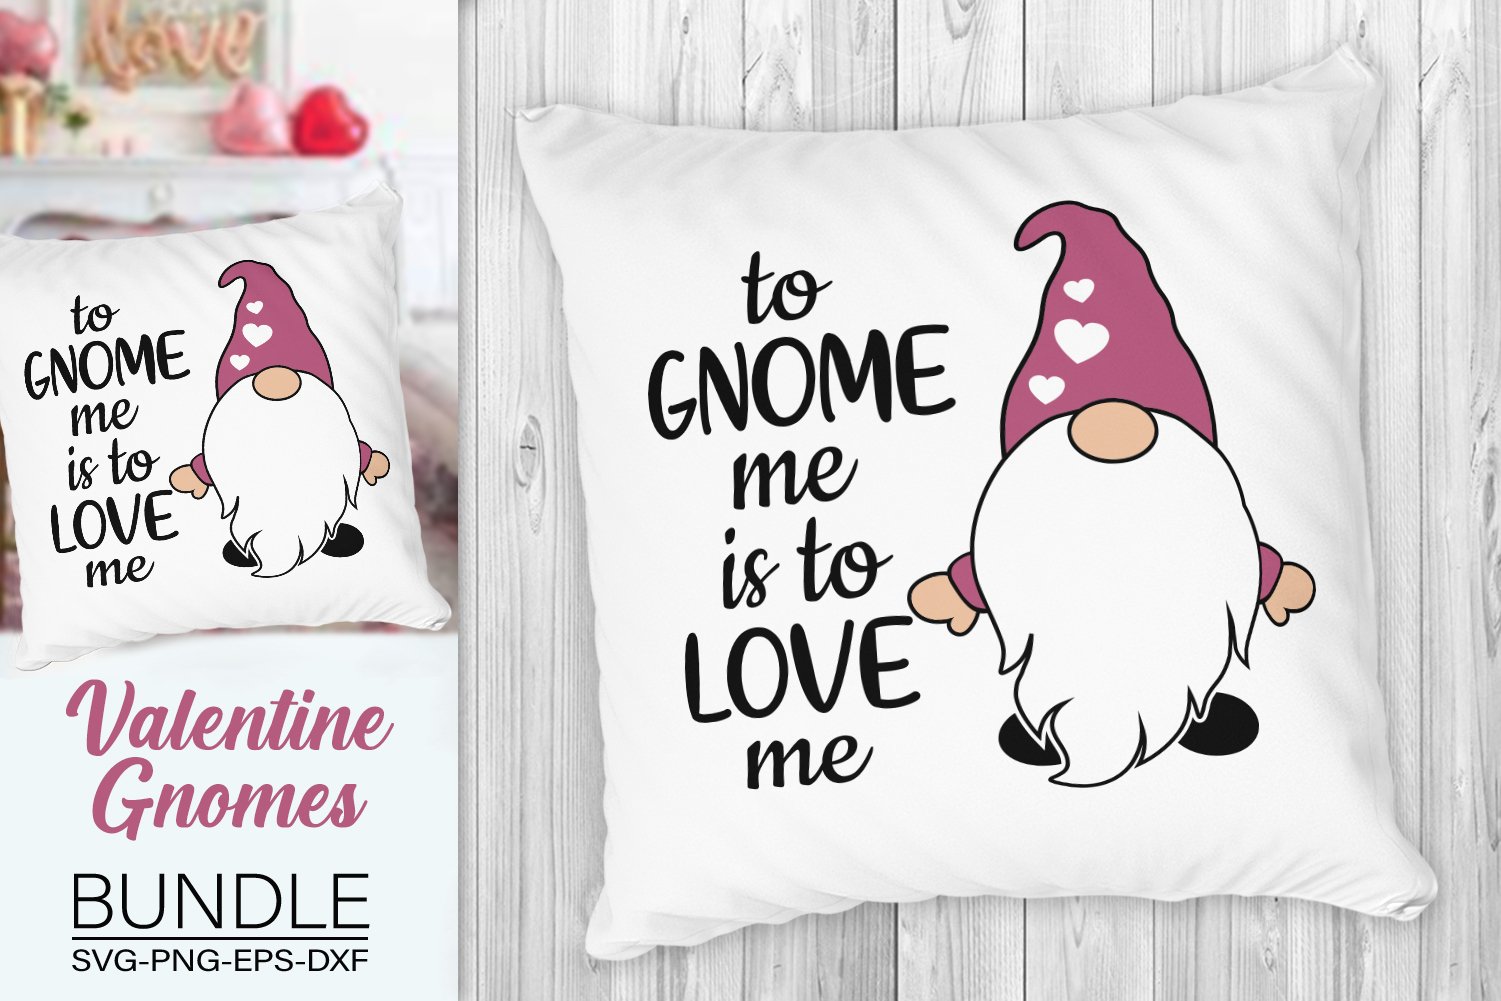 Delicate gnome on the pillow.